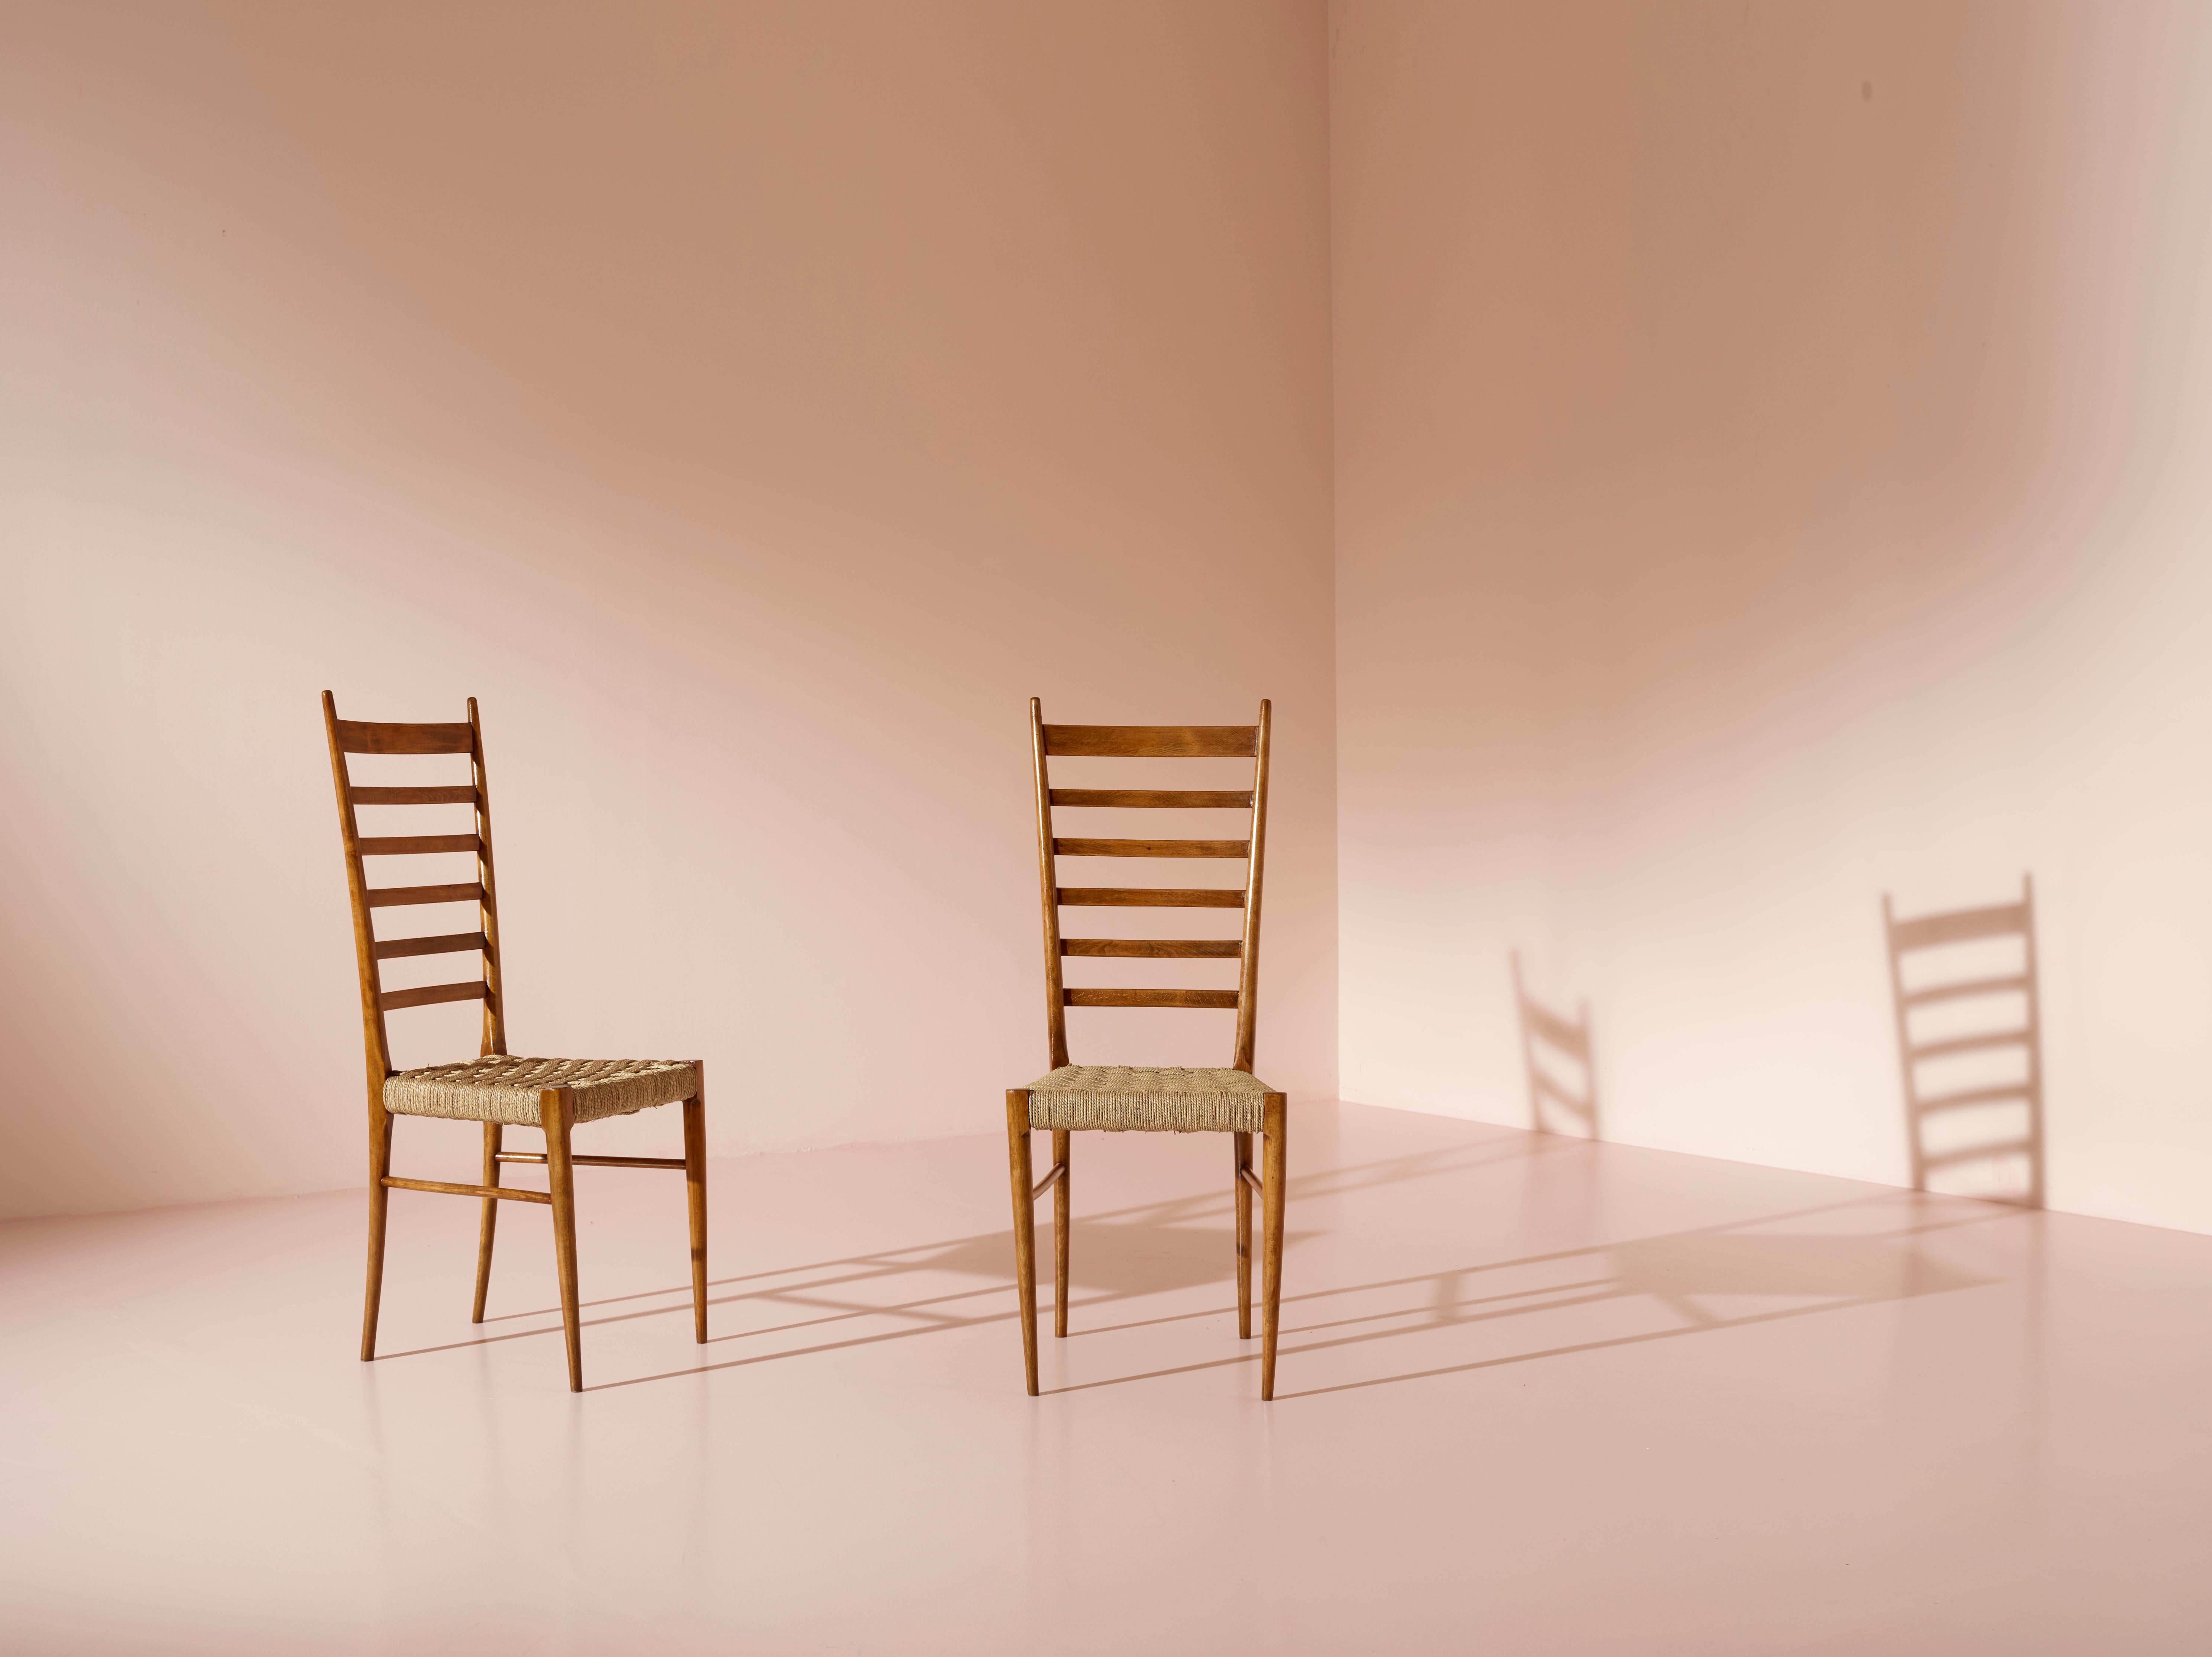 Colombo Sanguineti set of two ''Sei Stecche'' chairs, Chiavari, Italy, 1950s For Sale 10